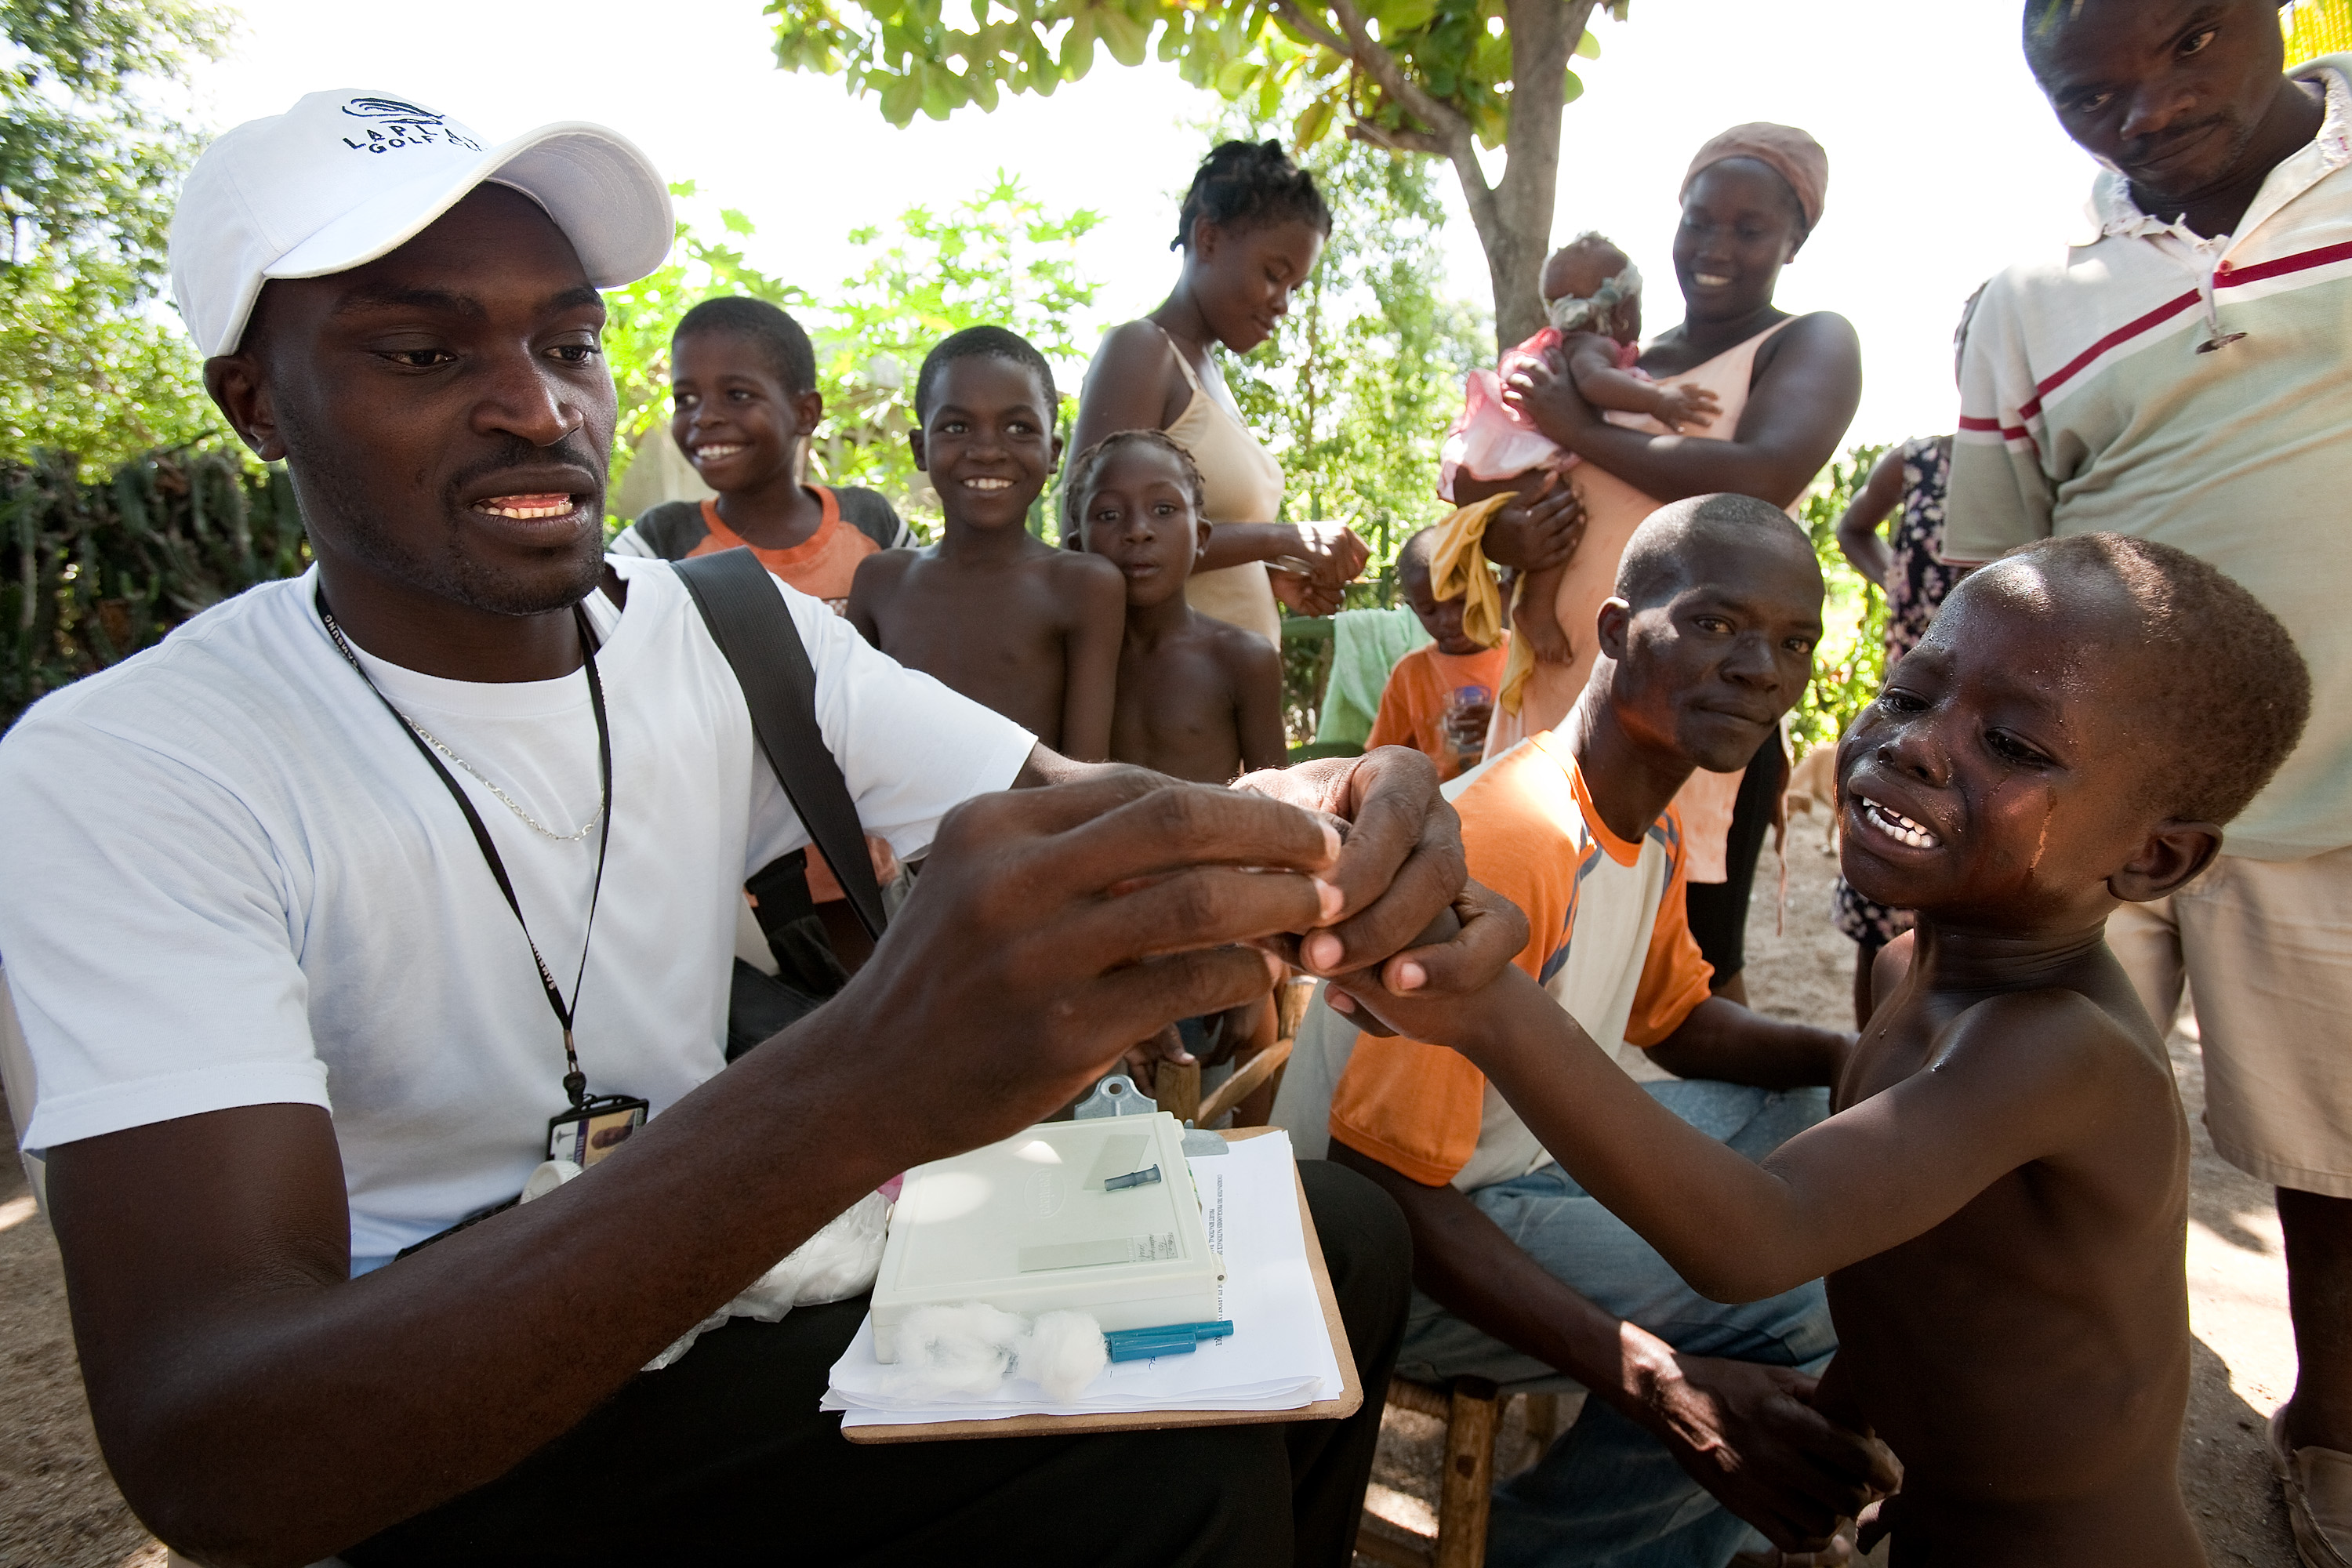 Haitian health worker Jonel Mompremier pricks the finger of a young child to test his blood for malaria parasites in Ouanaminthe, Haiti, October 6th, 2009. The efforts of The Bi-National Malaria and Lympathic Filariasis Project have increased malaria surveillance and treatment in both Dominican Republic and Haiti. "The most important thing we can do is eliminate malaria," Mompremier says. "I'm happy to contribute to the solution."